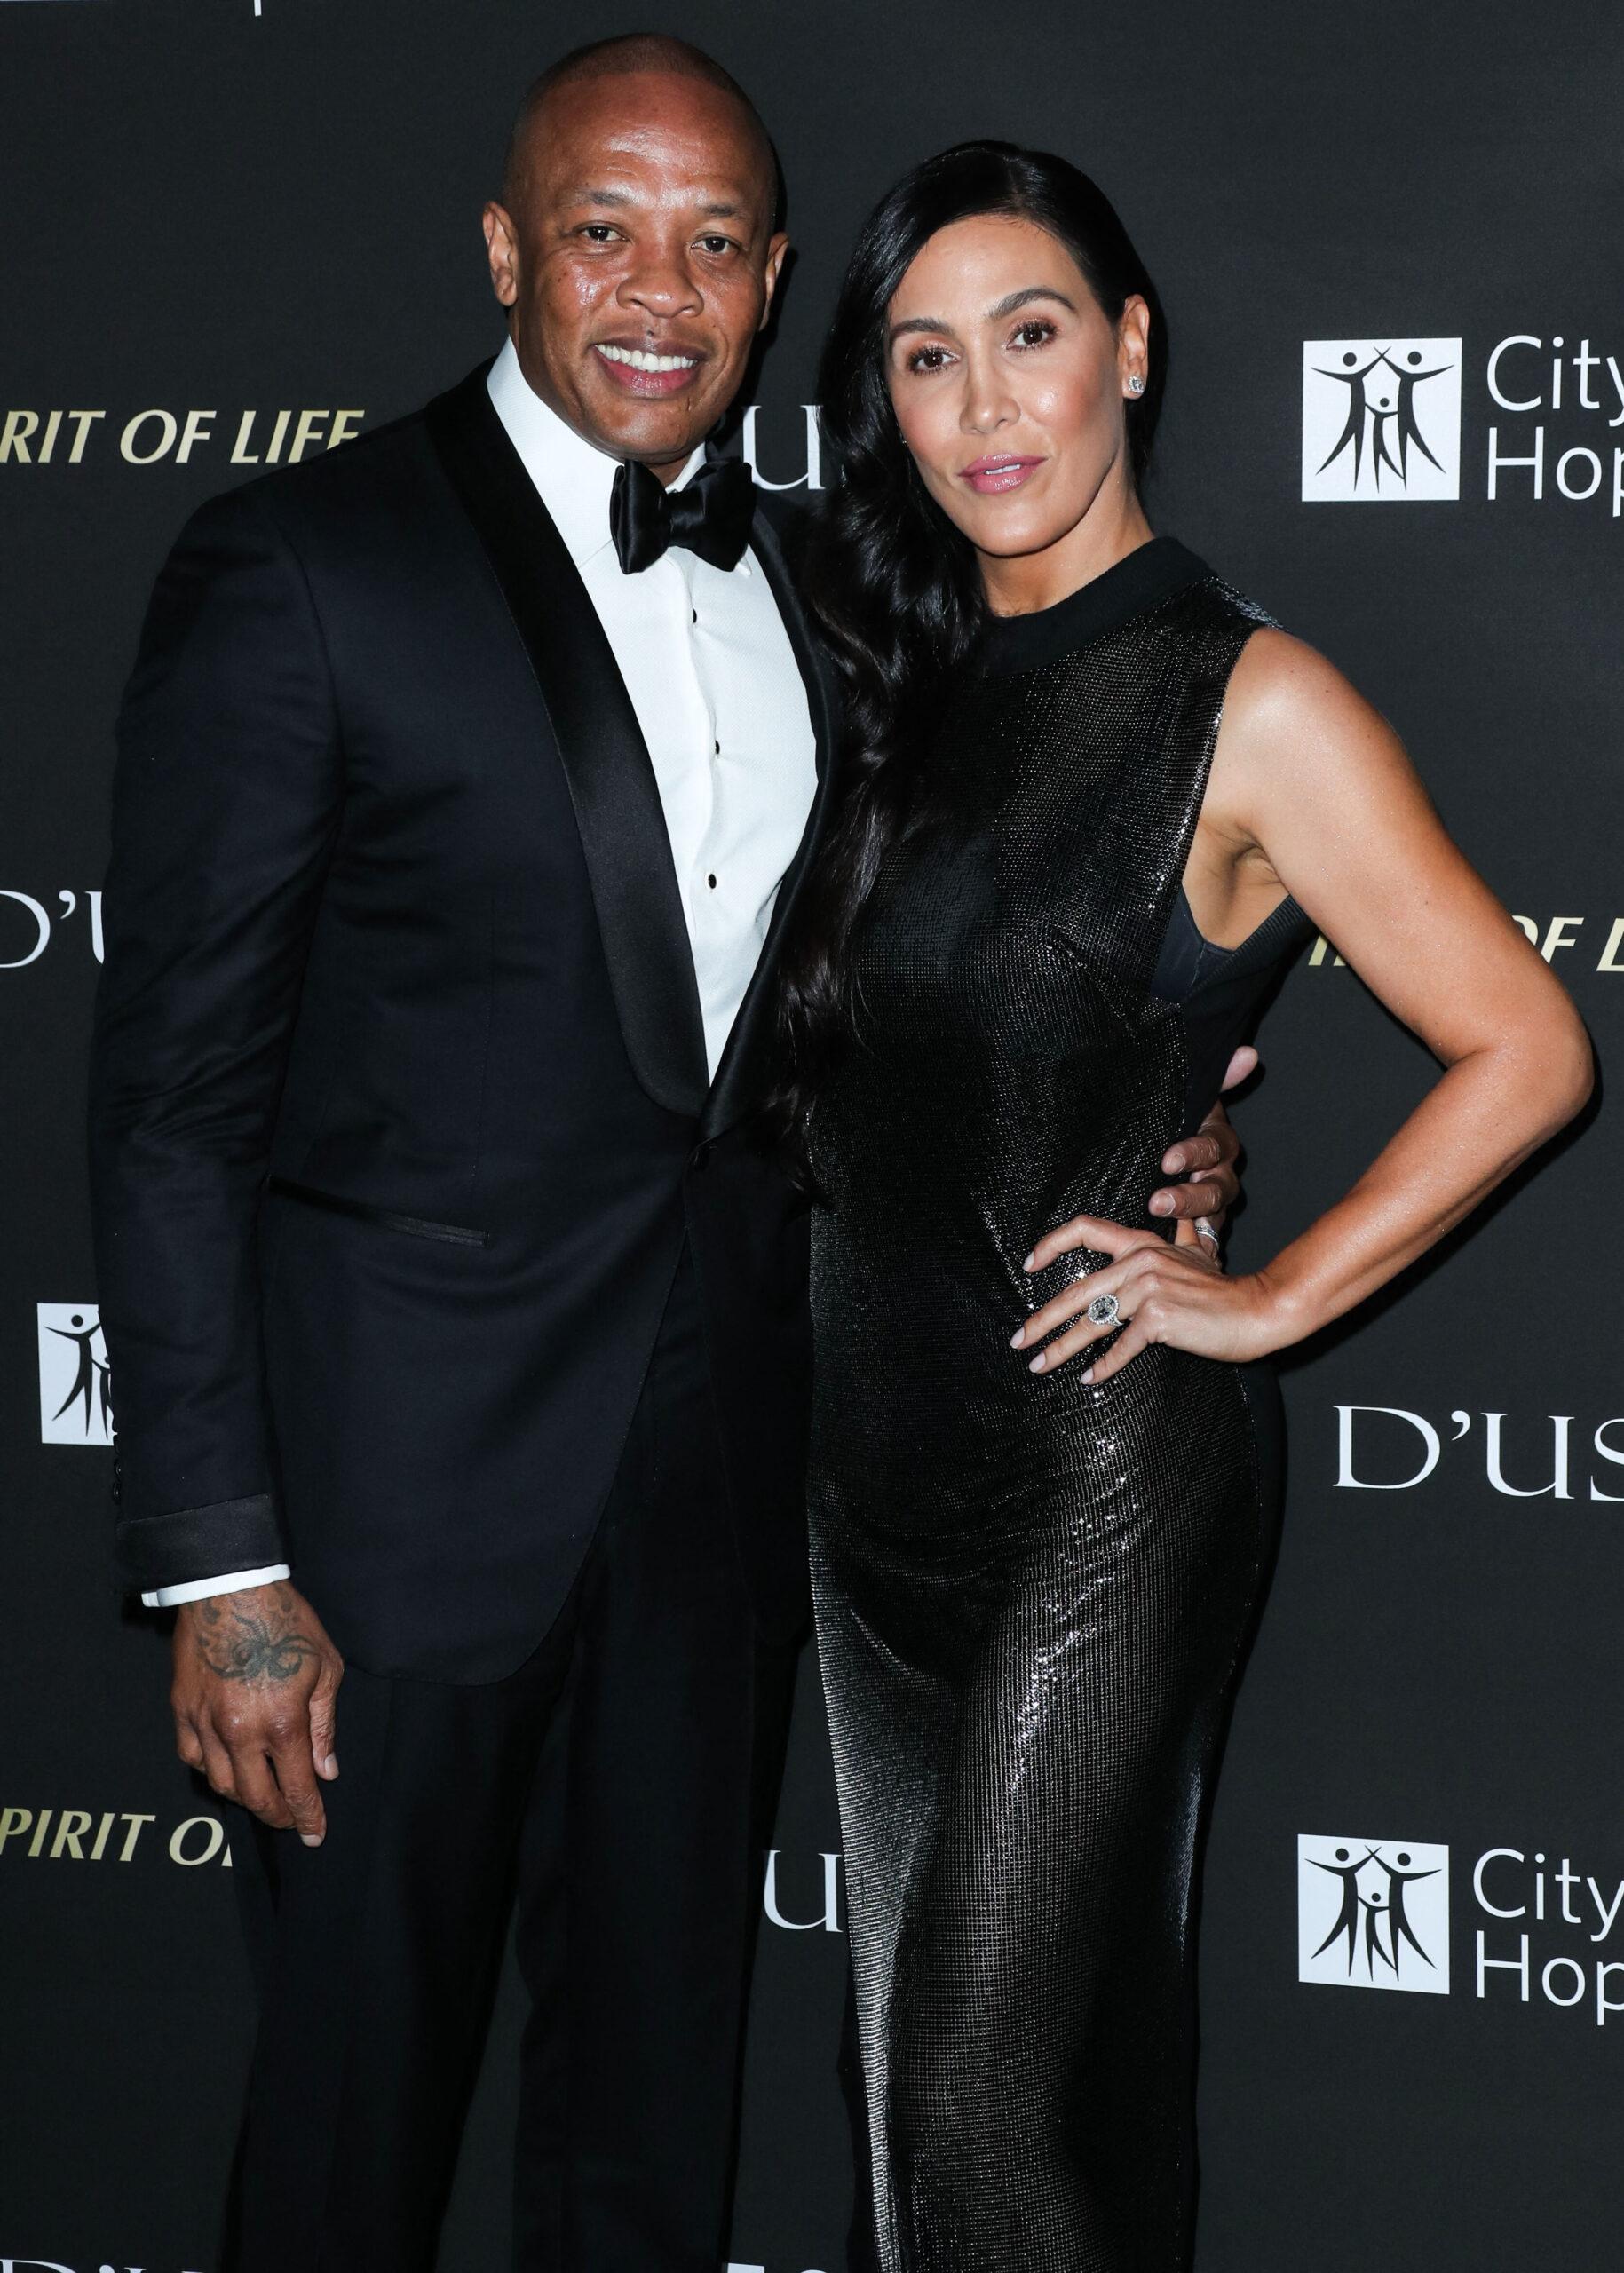 Dr. Dre and Nicole Young at City Of Hope Gala 2018